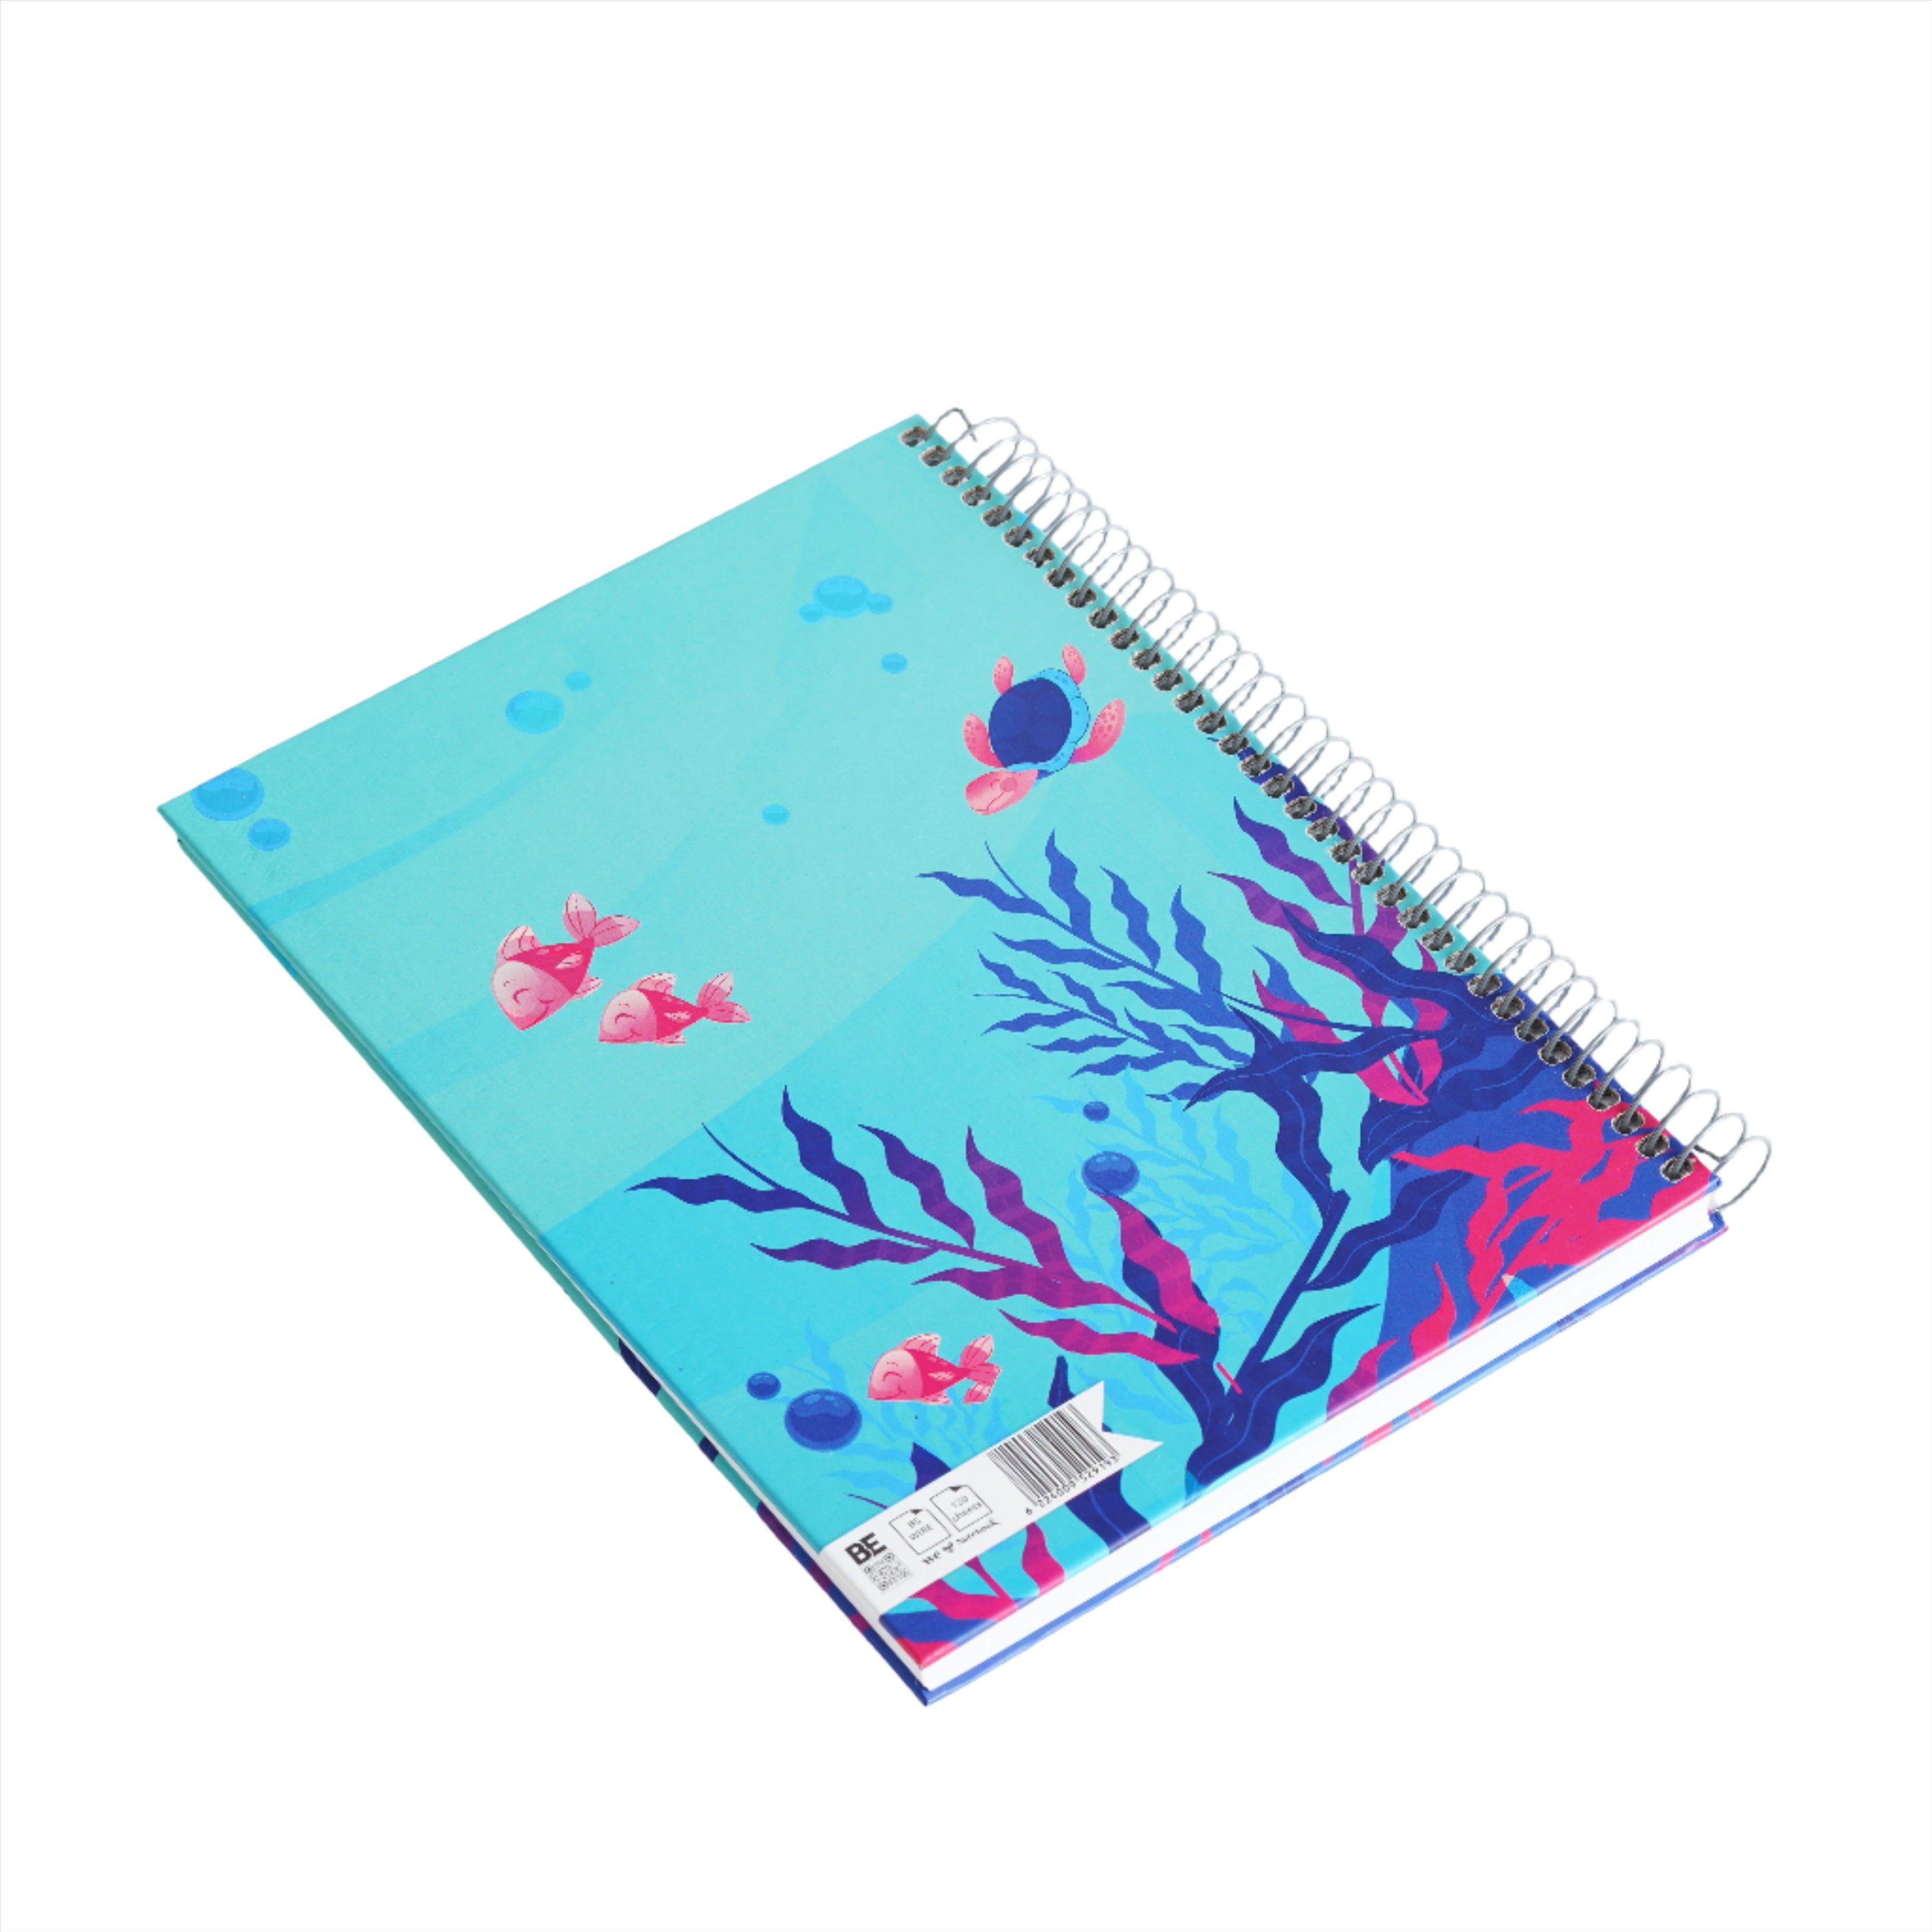 2BE Spiral Notebook B5 160 sheets - Collect adventures not things